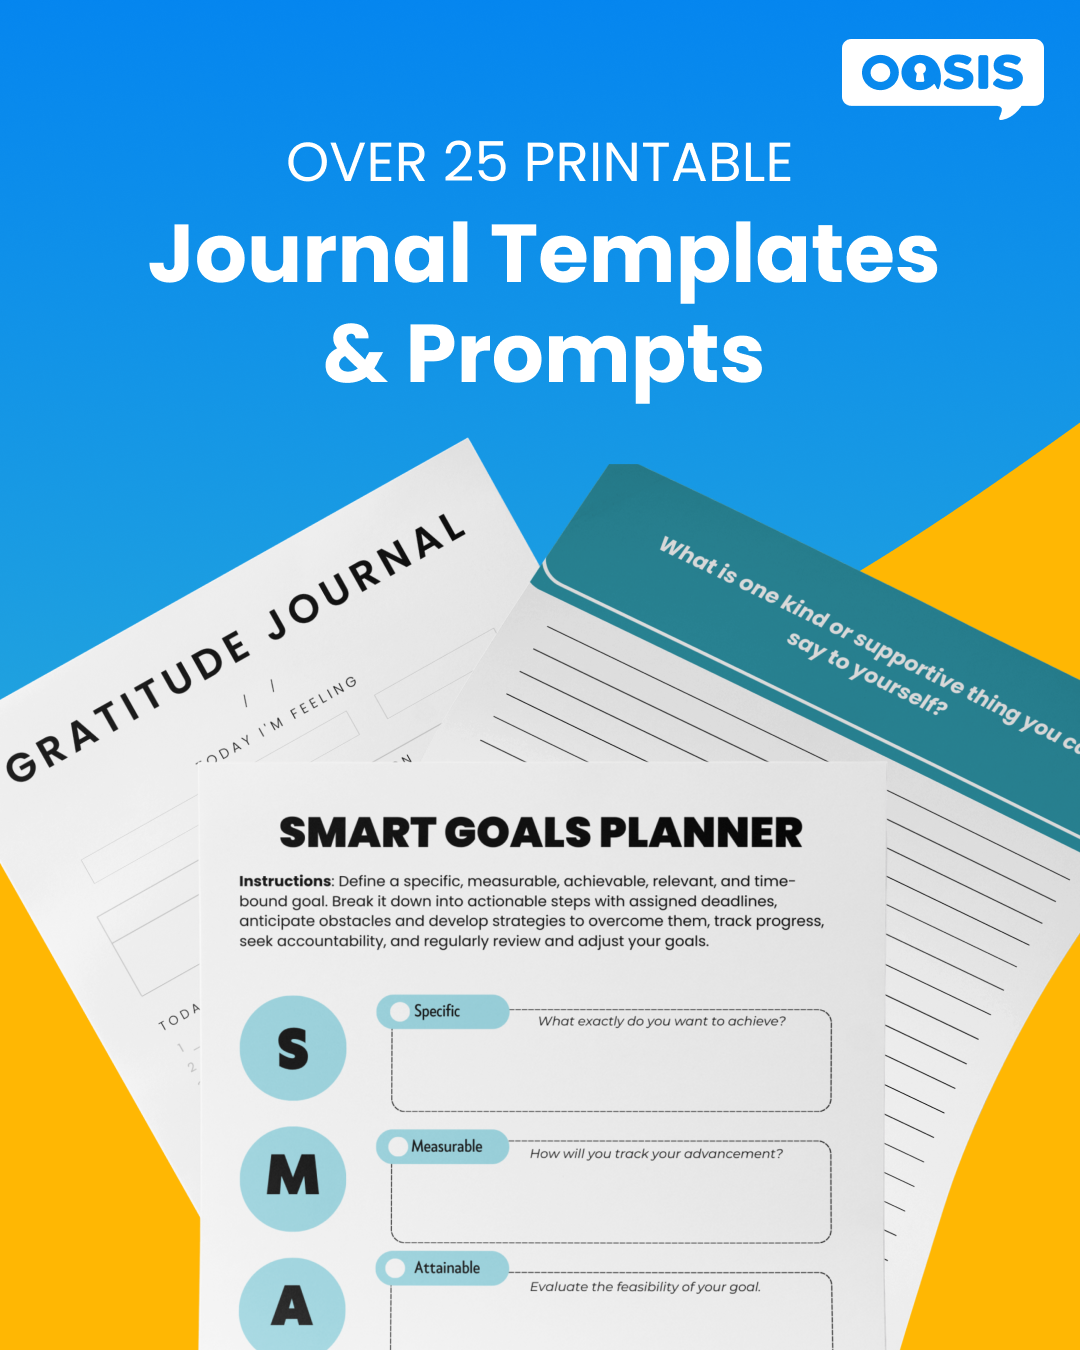 Printable Journal Templates & Prompts